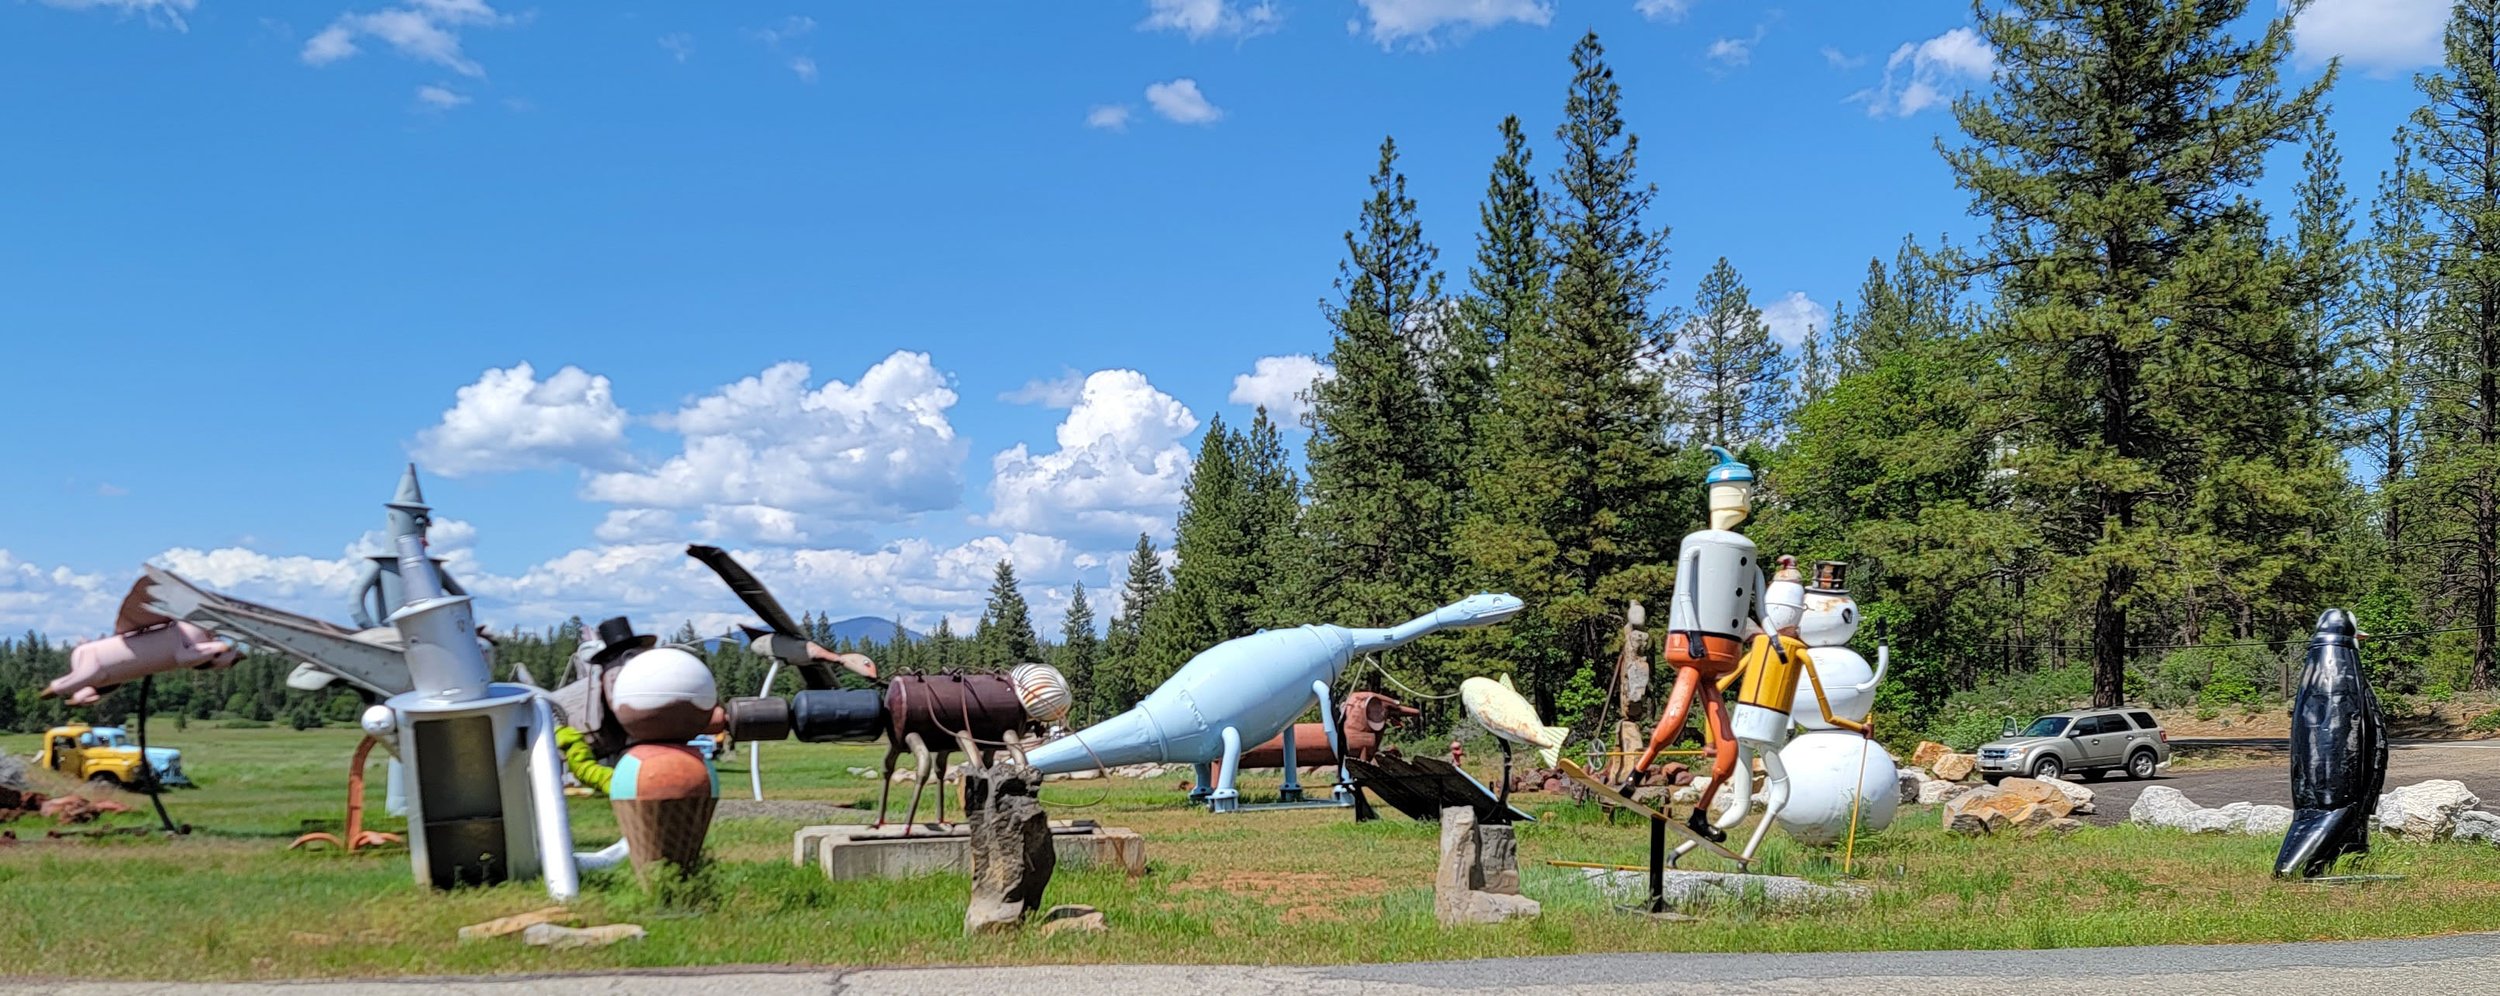 About an hour from there you can find this random sculpture bonanza in a tiny town called Cassel.